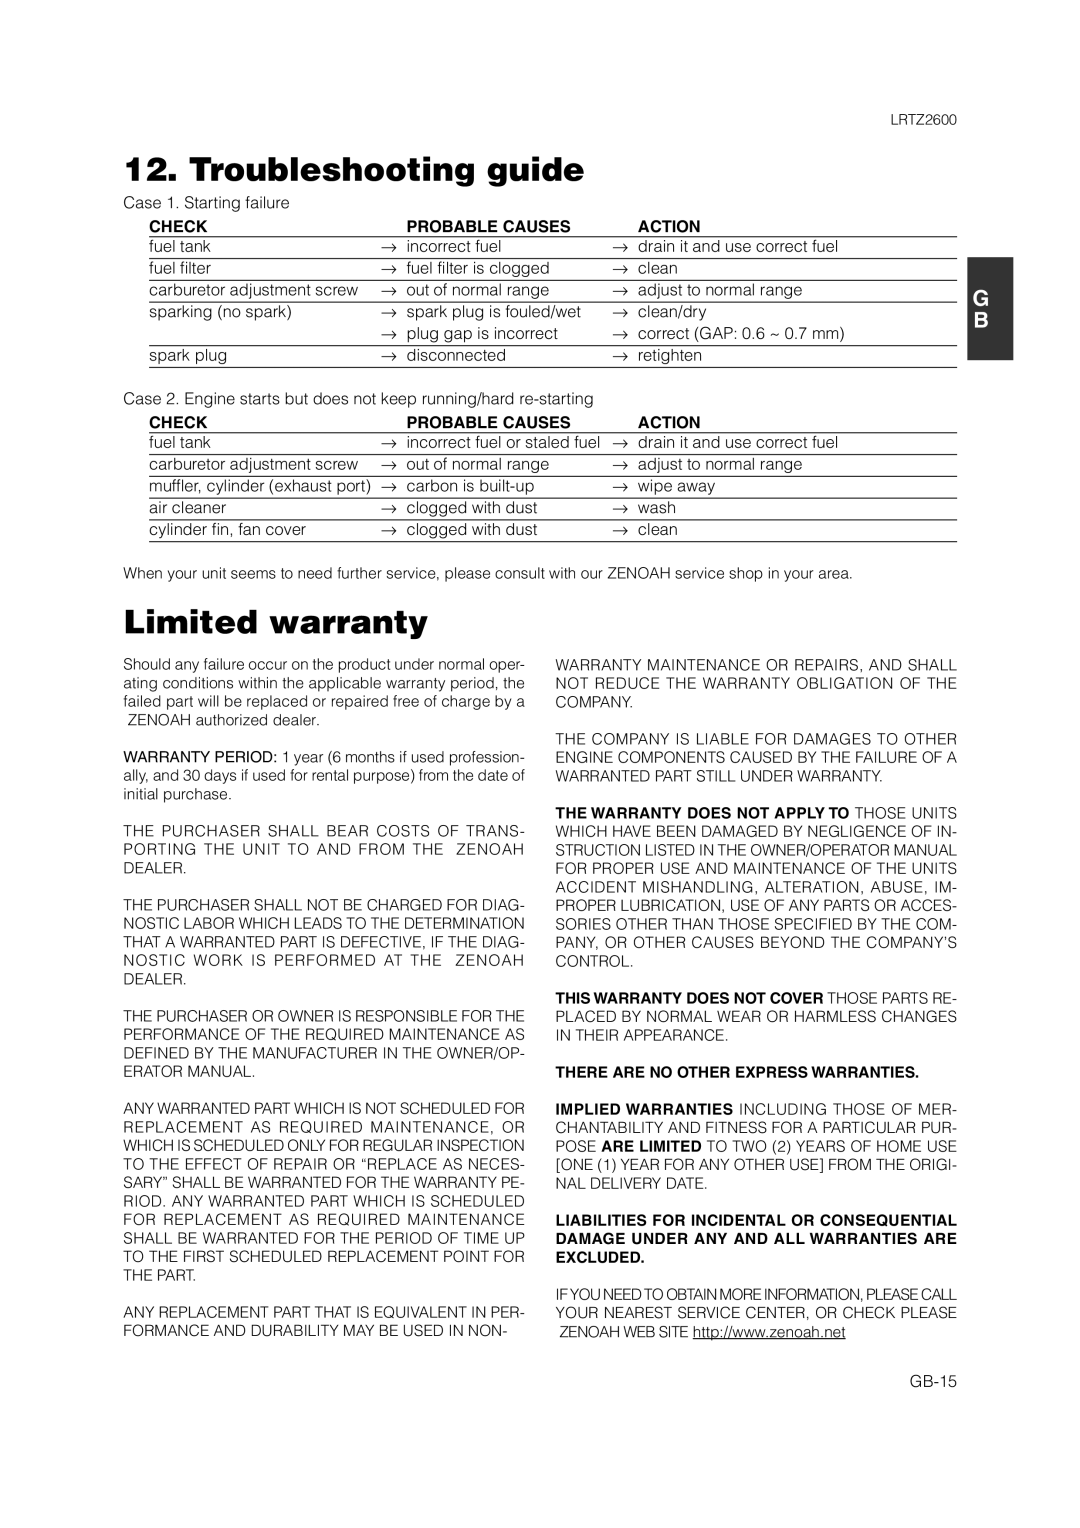 Zenoah LRTZ2600 owner manual Troubleshooting guide, Limited warranty, Check, Probable Causes, Action 